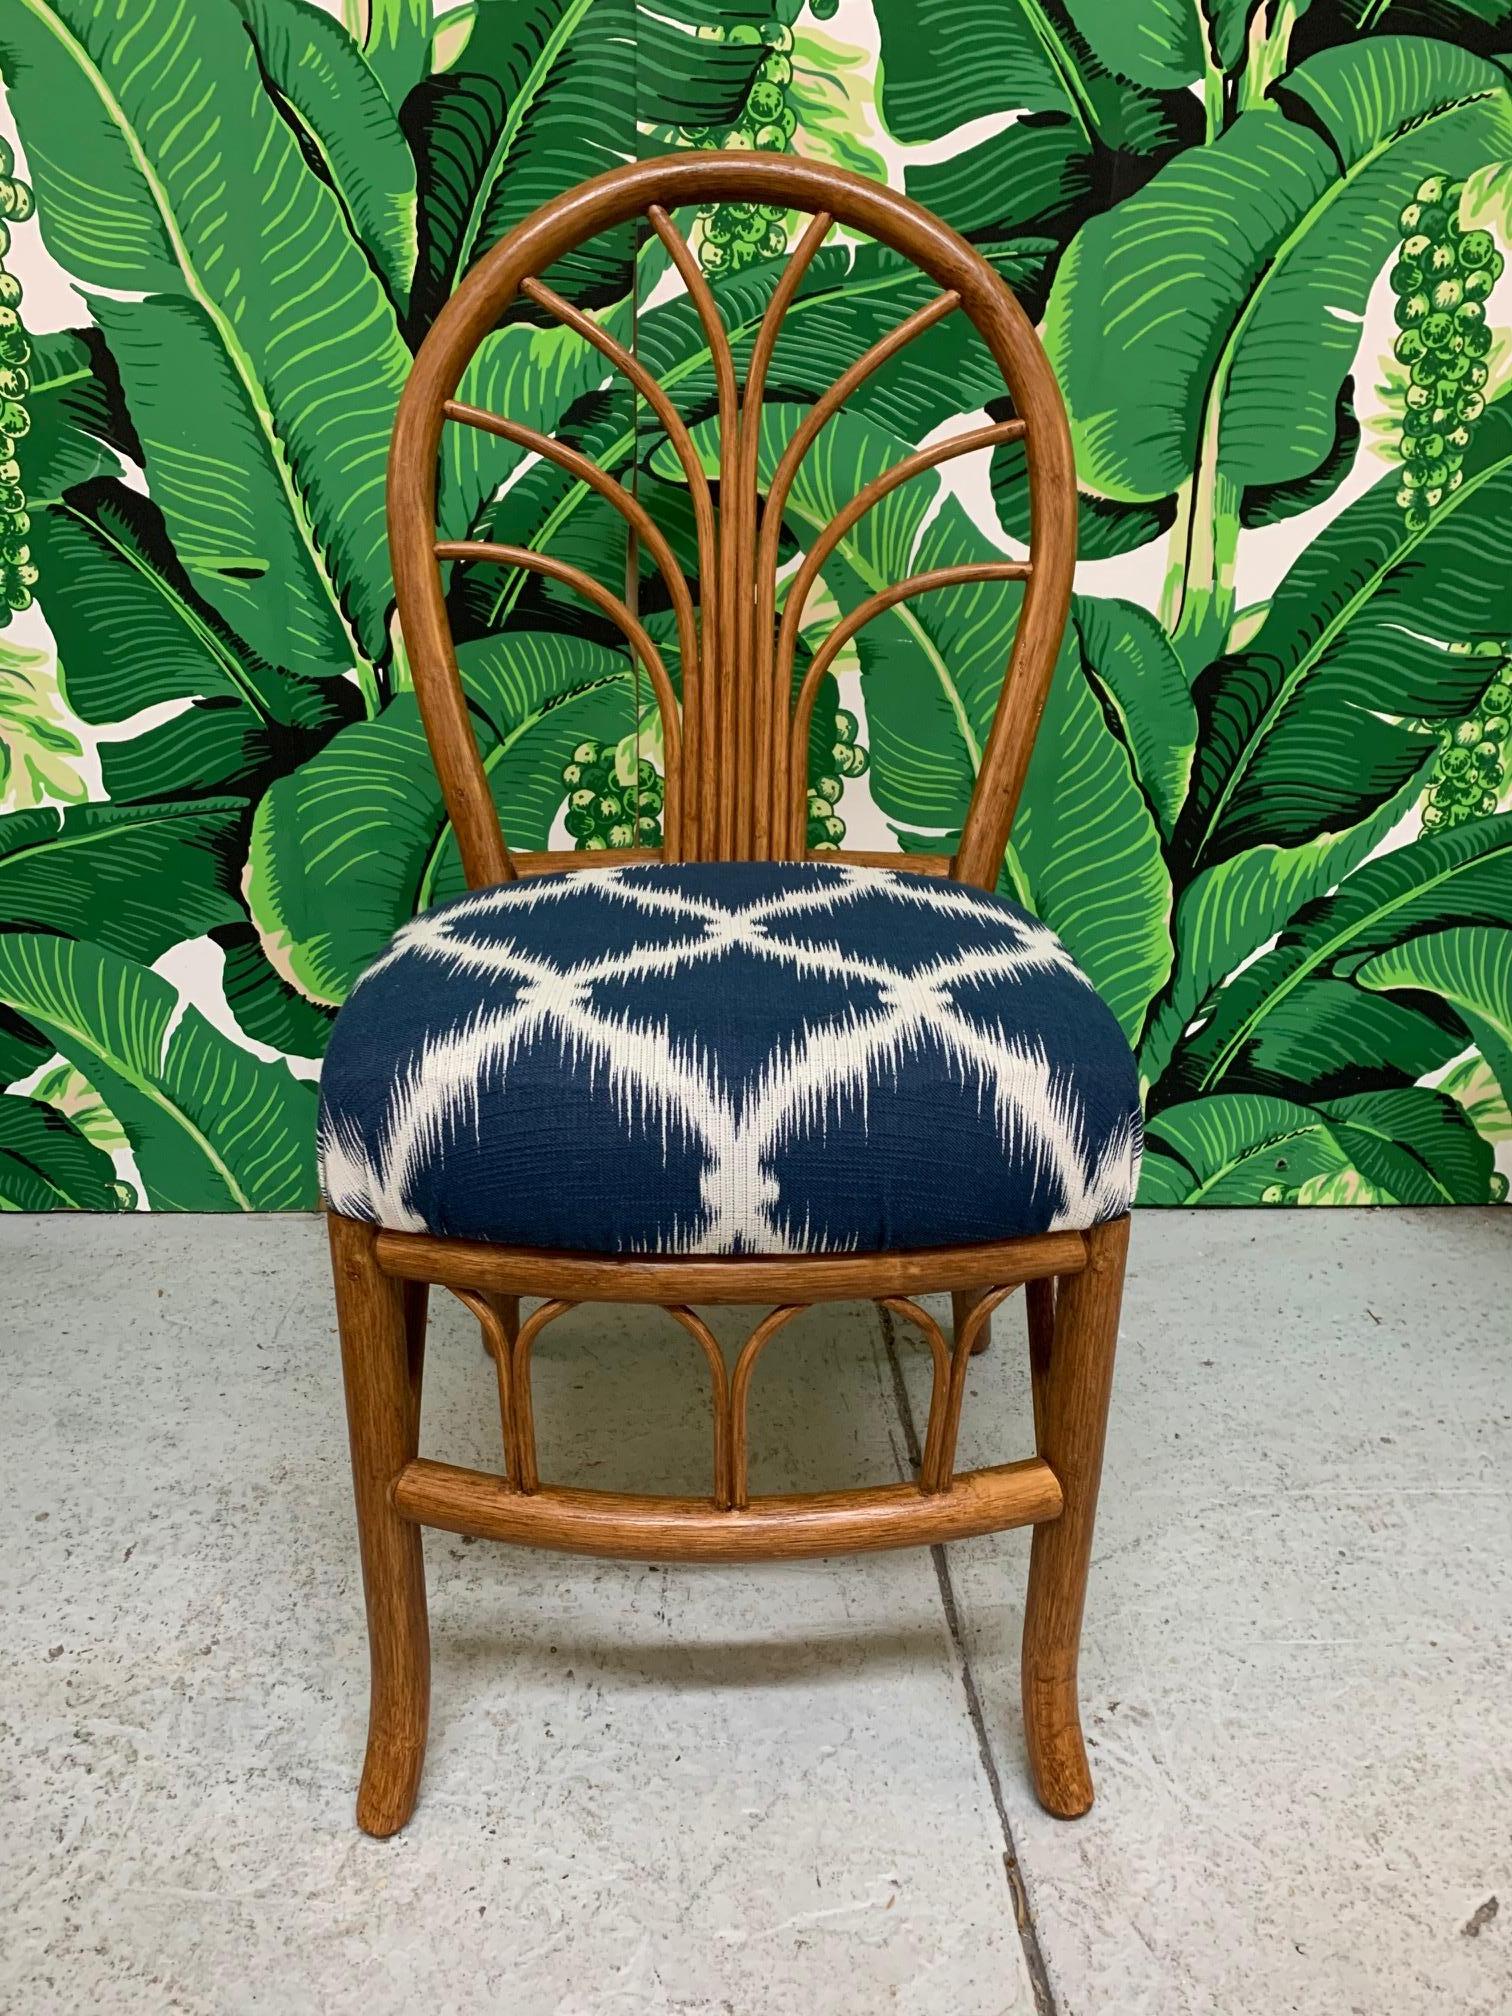 Set of four vintage rattan dining chairs includes two side chairs and two armchairs. Upholstered in blue and white modern fabric. Very good condition with only very minor imperfections consistent with age. Side chairs measure 16.5